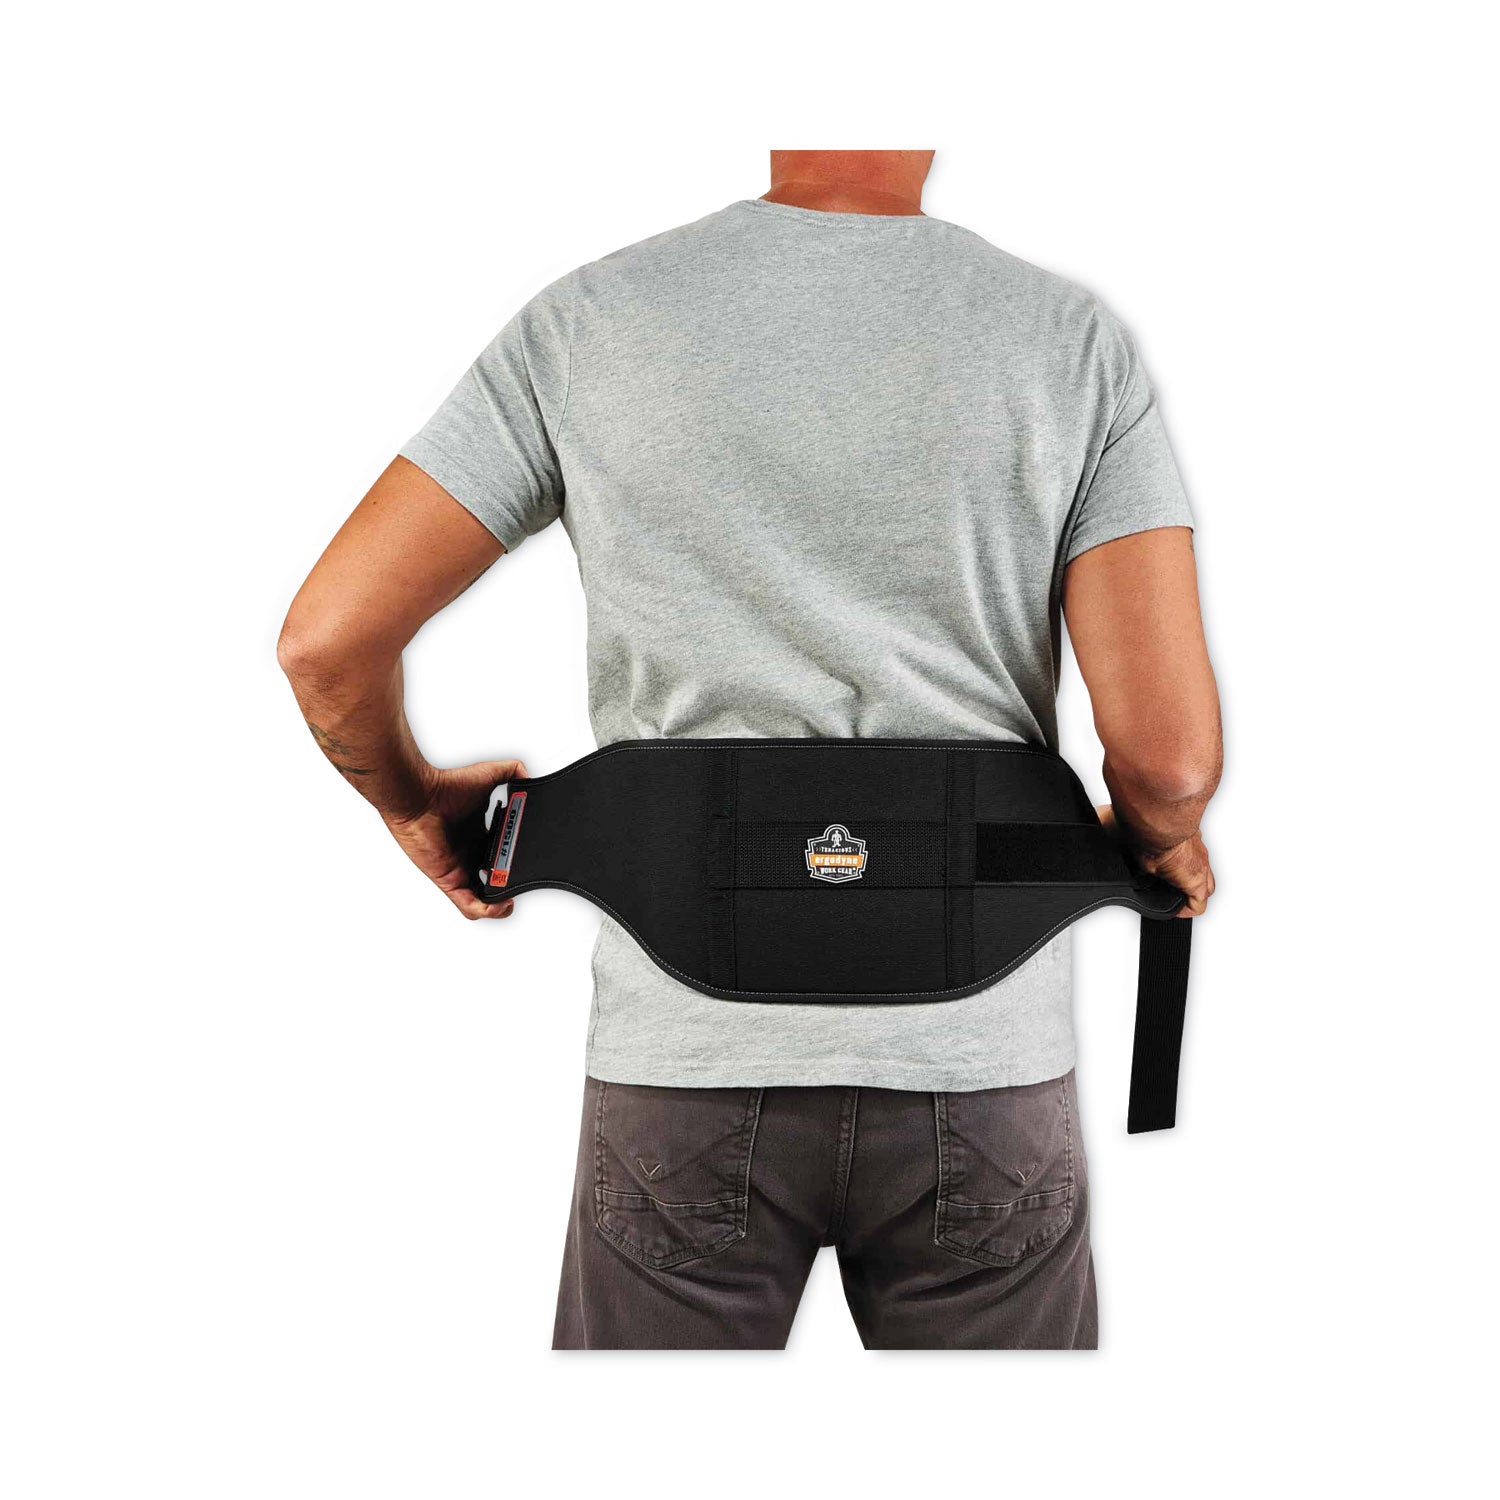 proflex-1500-weight-lifters-style-back-support-belt-medium-30-to-34-waist-black-ships-in-1-3-business-days_ego11472 - 3